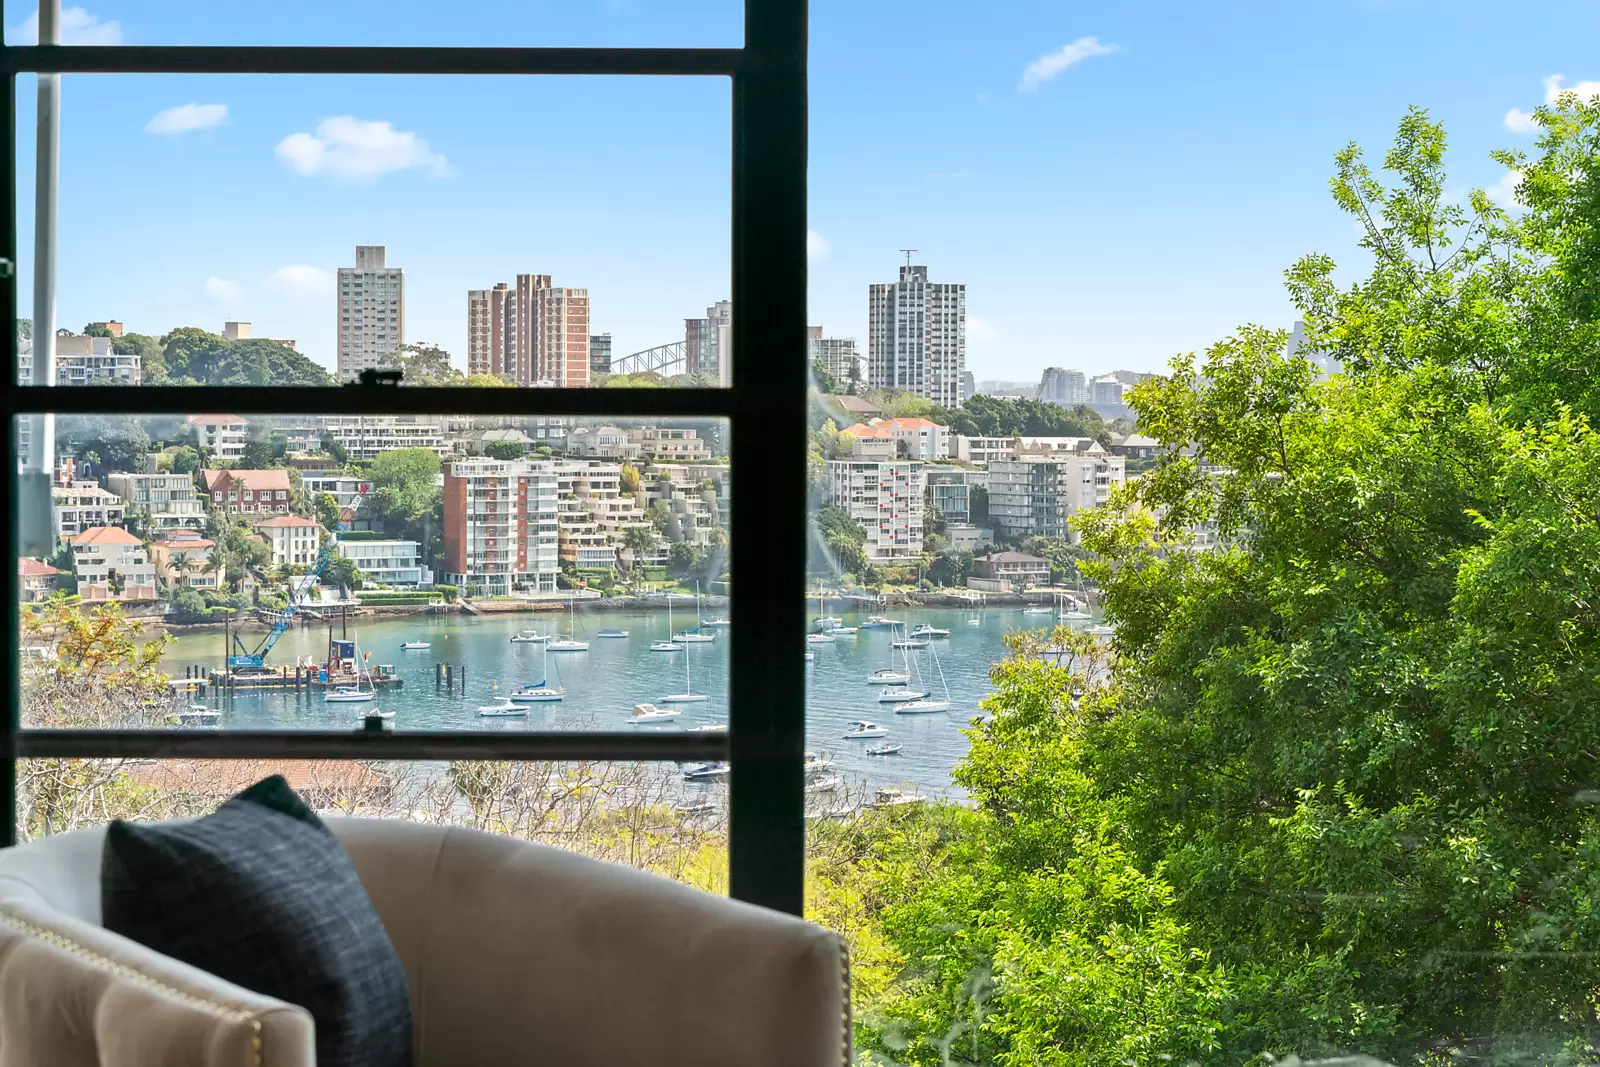 Photo #5: 52/36 Fairfax Road, Bellevue Hill - Auction by Sydney Sotheby's International Realty